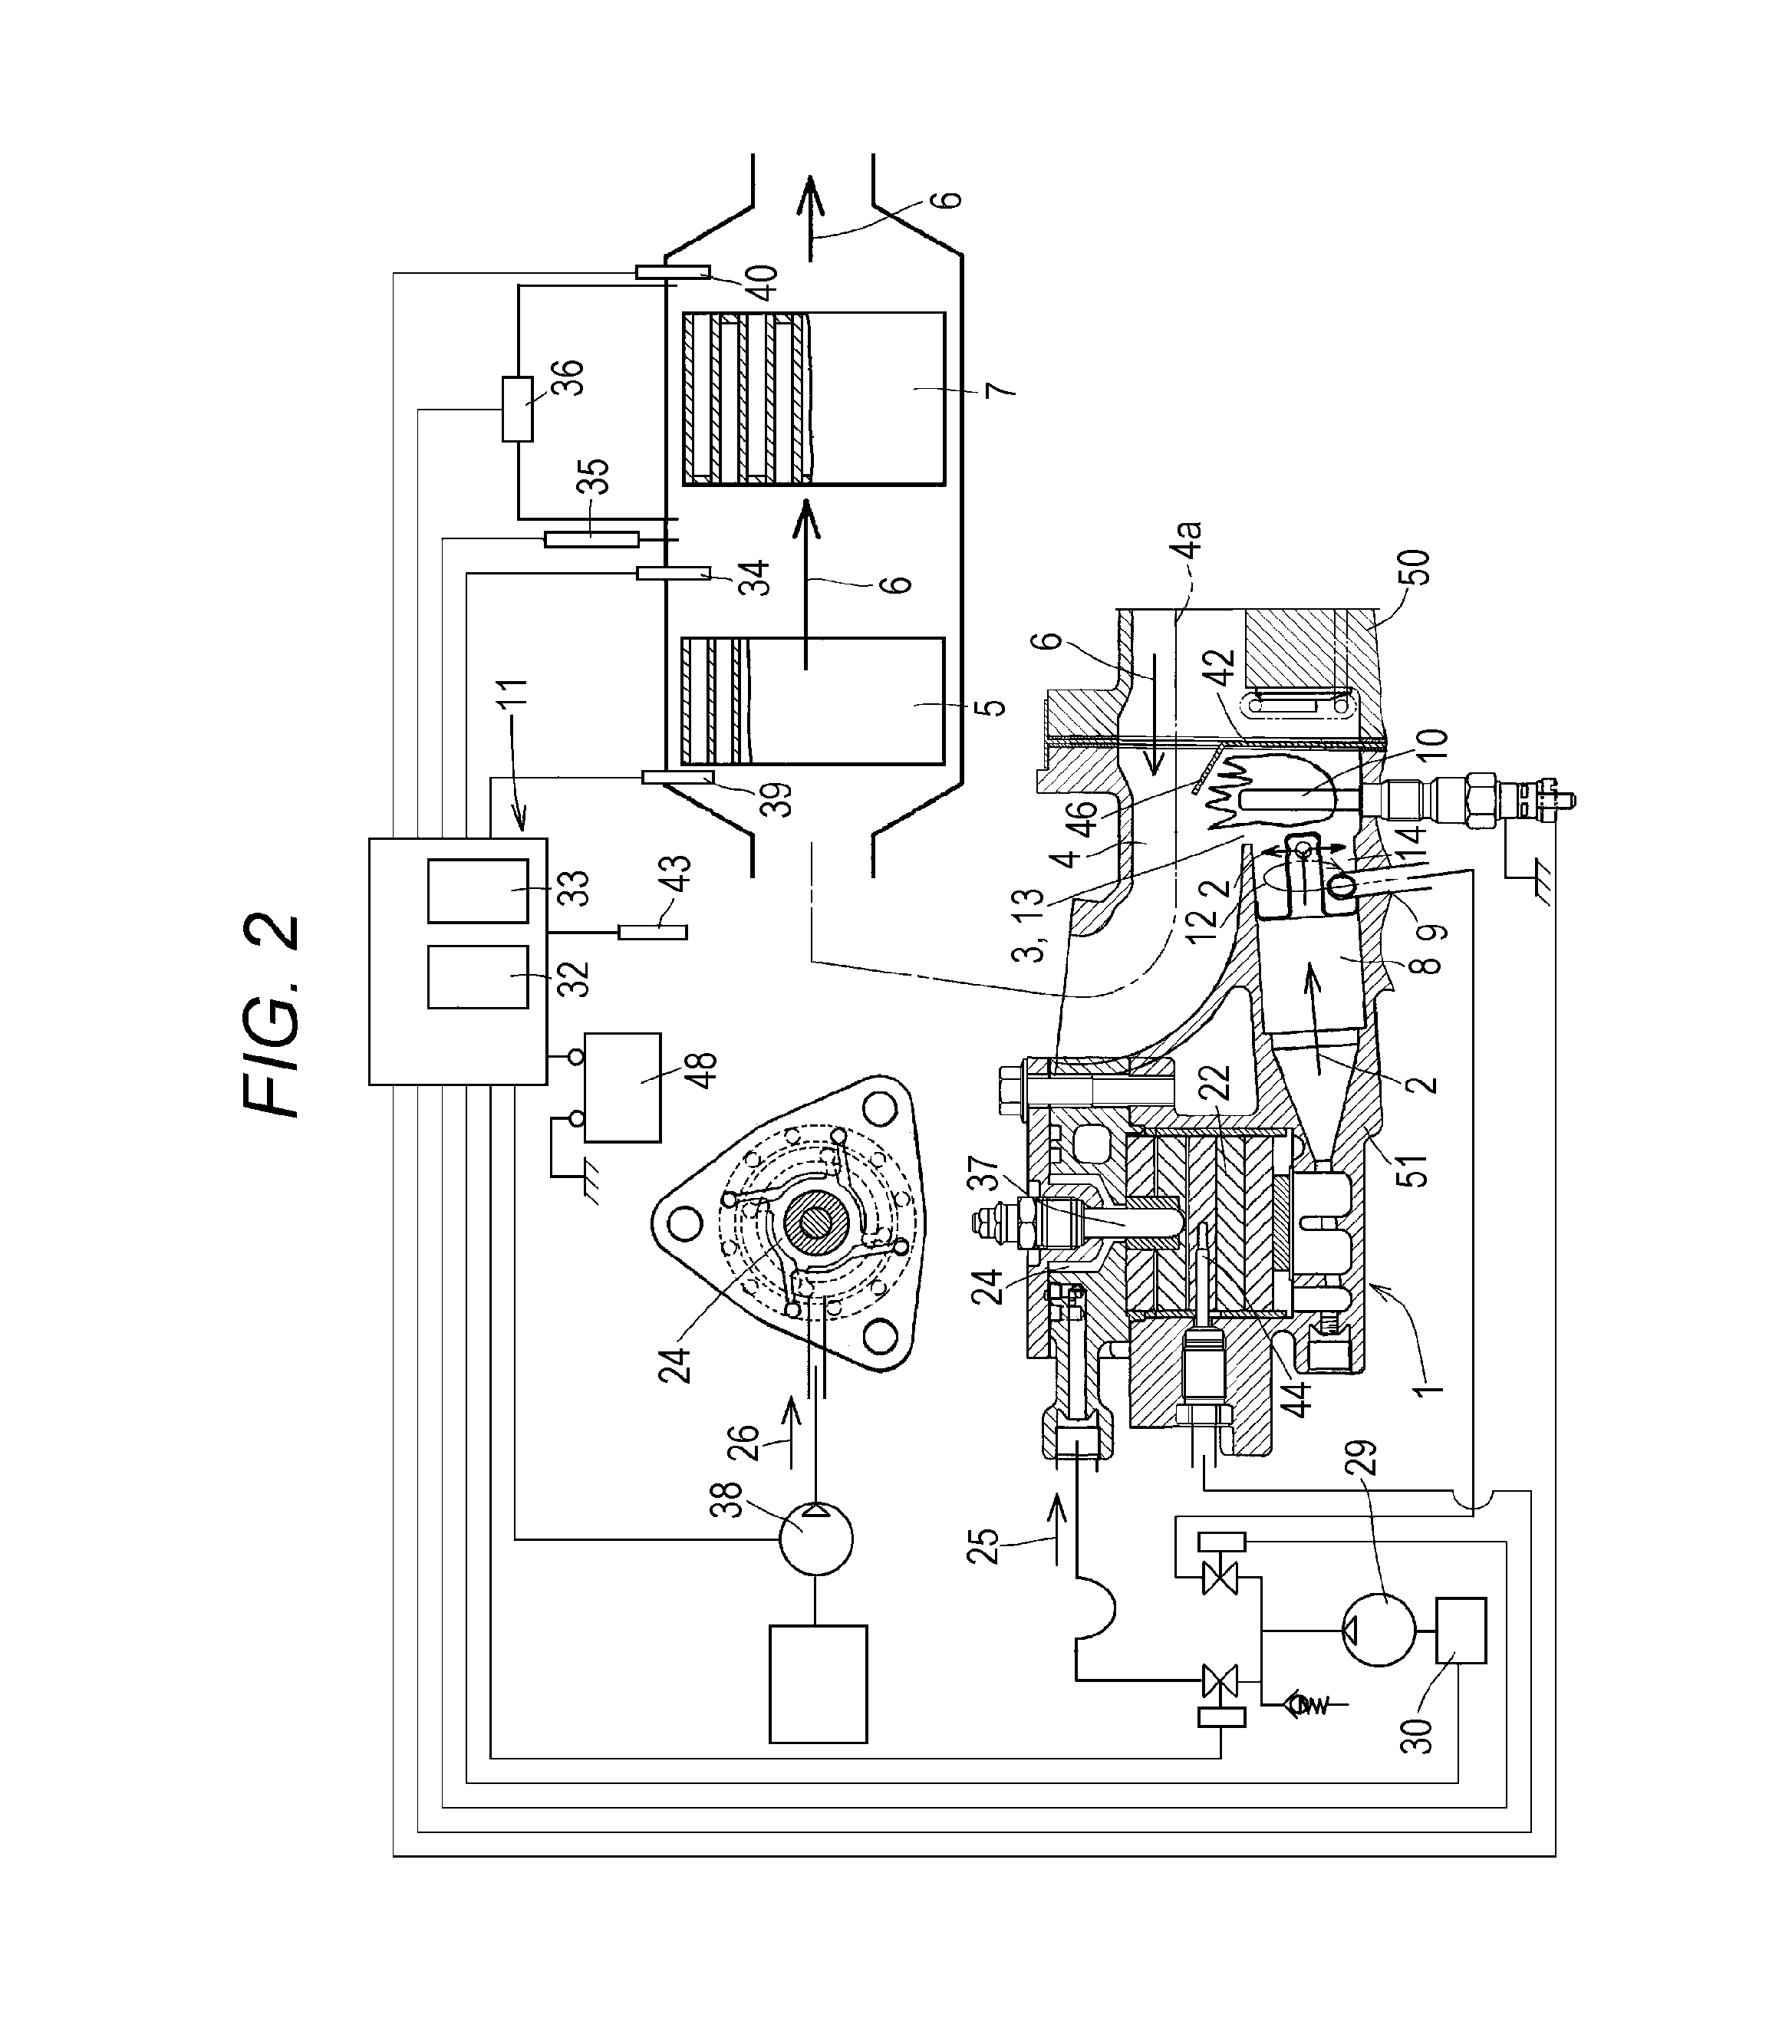 Exhaust treatment apparatus for engine